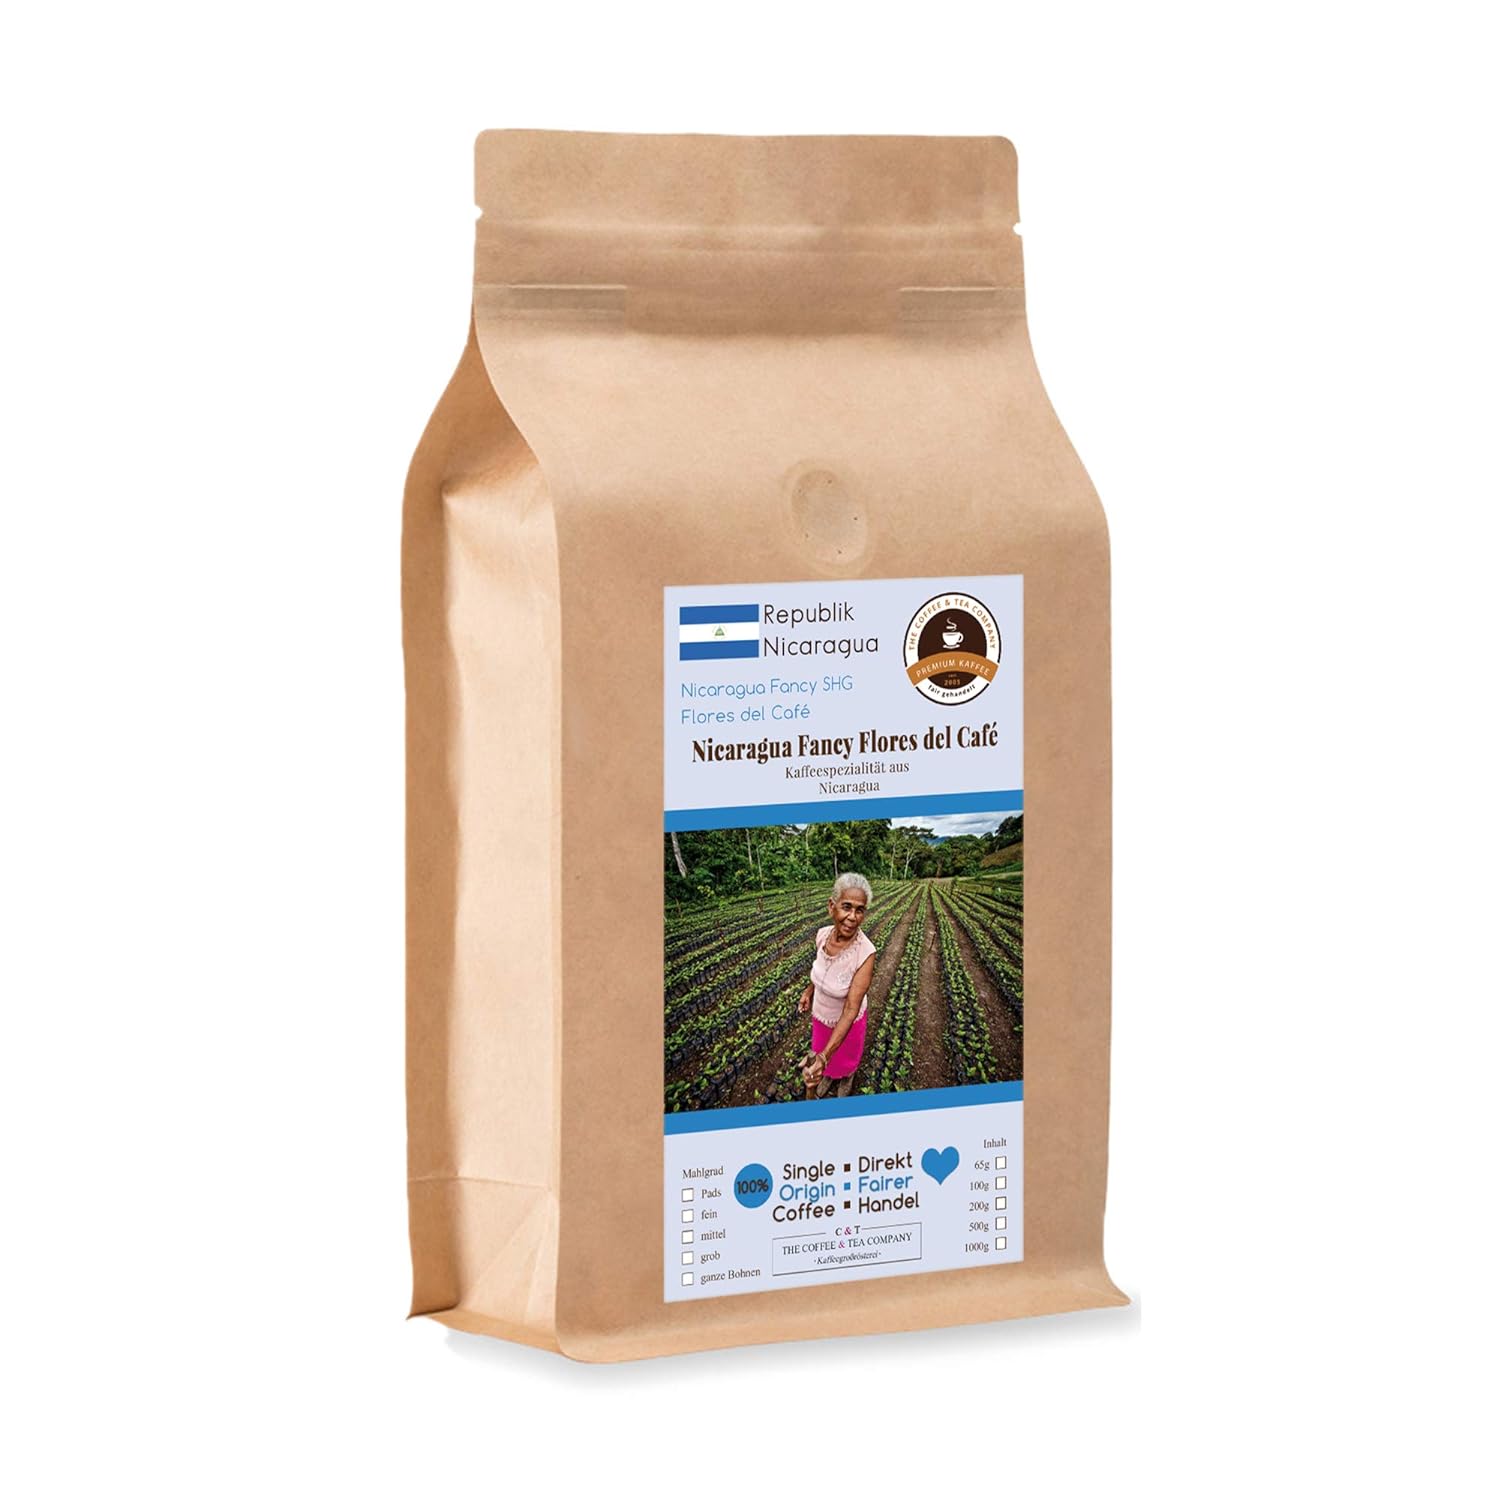 Coffee Globetrotter - Coffee with Heart - Nicaragua Fancy Flores del Café - 1000 g Finely Ground - Top Coffee from the Women\'s Fund Project Fair Traded Supports Social Projects